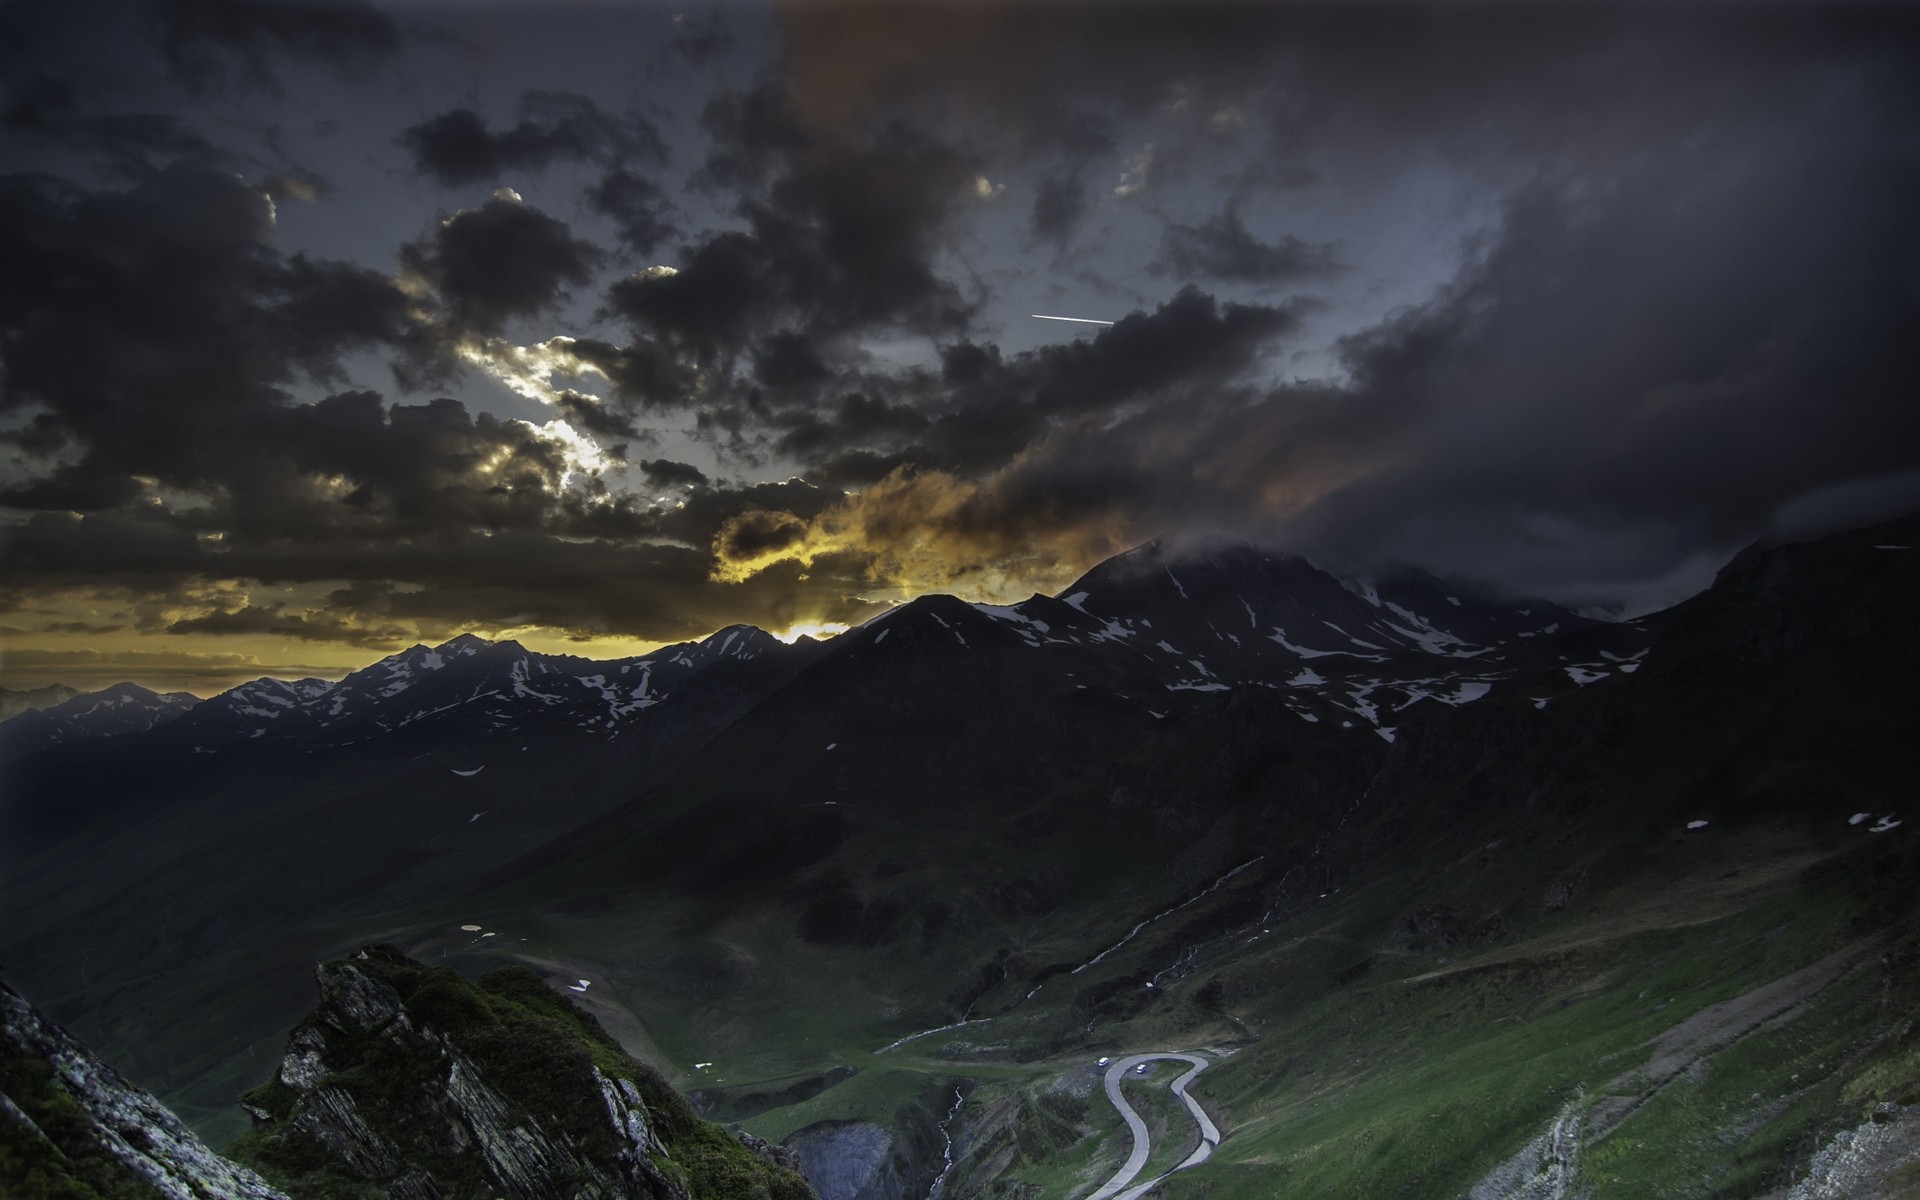 General 1920x1200 nature landscape valley sunset road mountains France clouds snowy peak dark low light hairpin turns